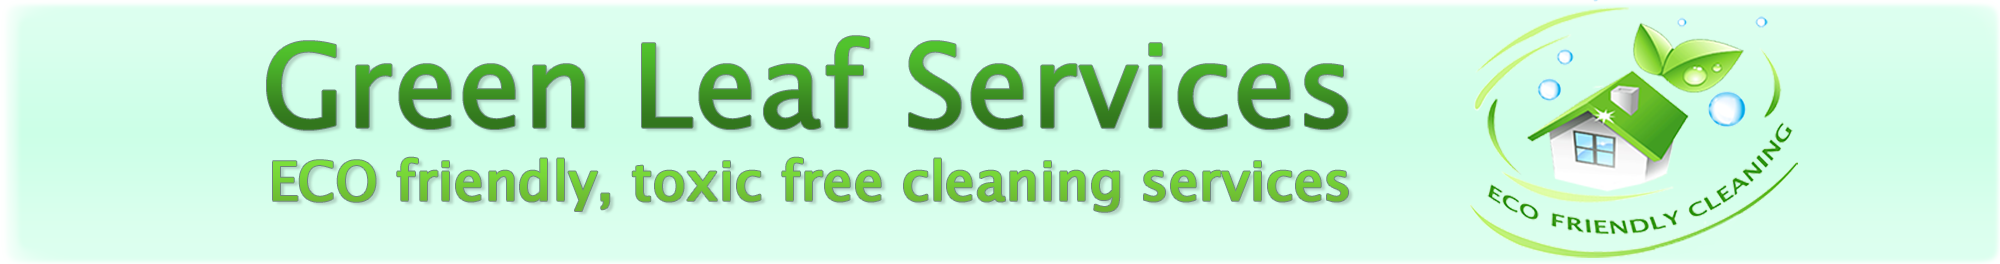 Green Leaf Services Dublin Eco friendly cleaning services